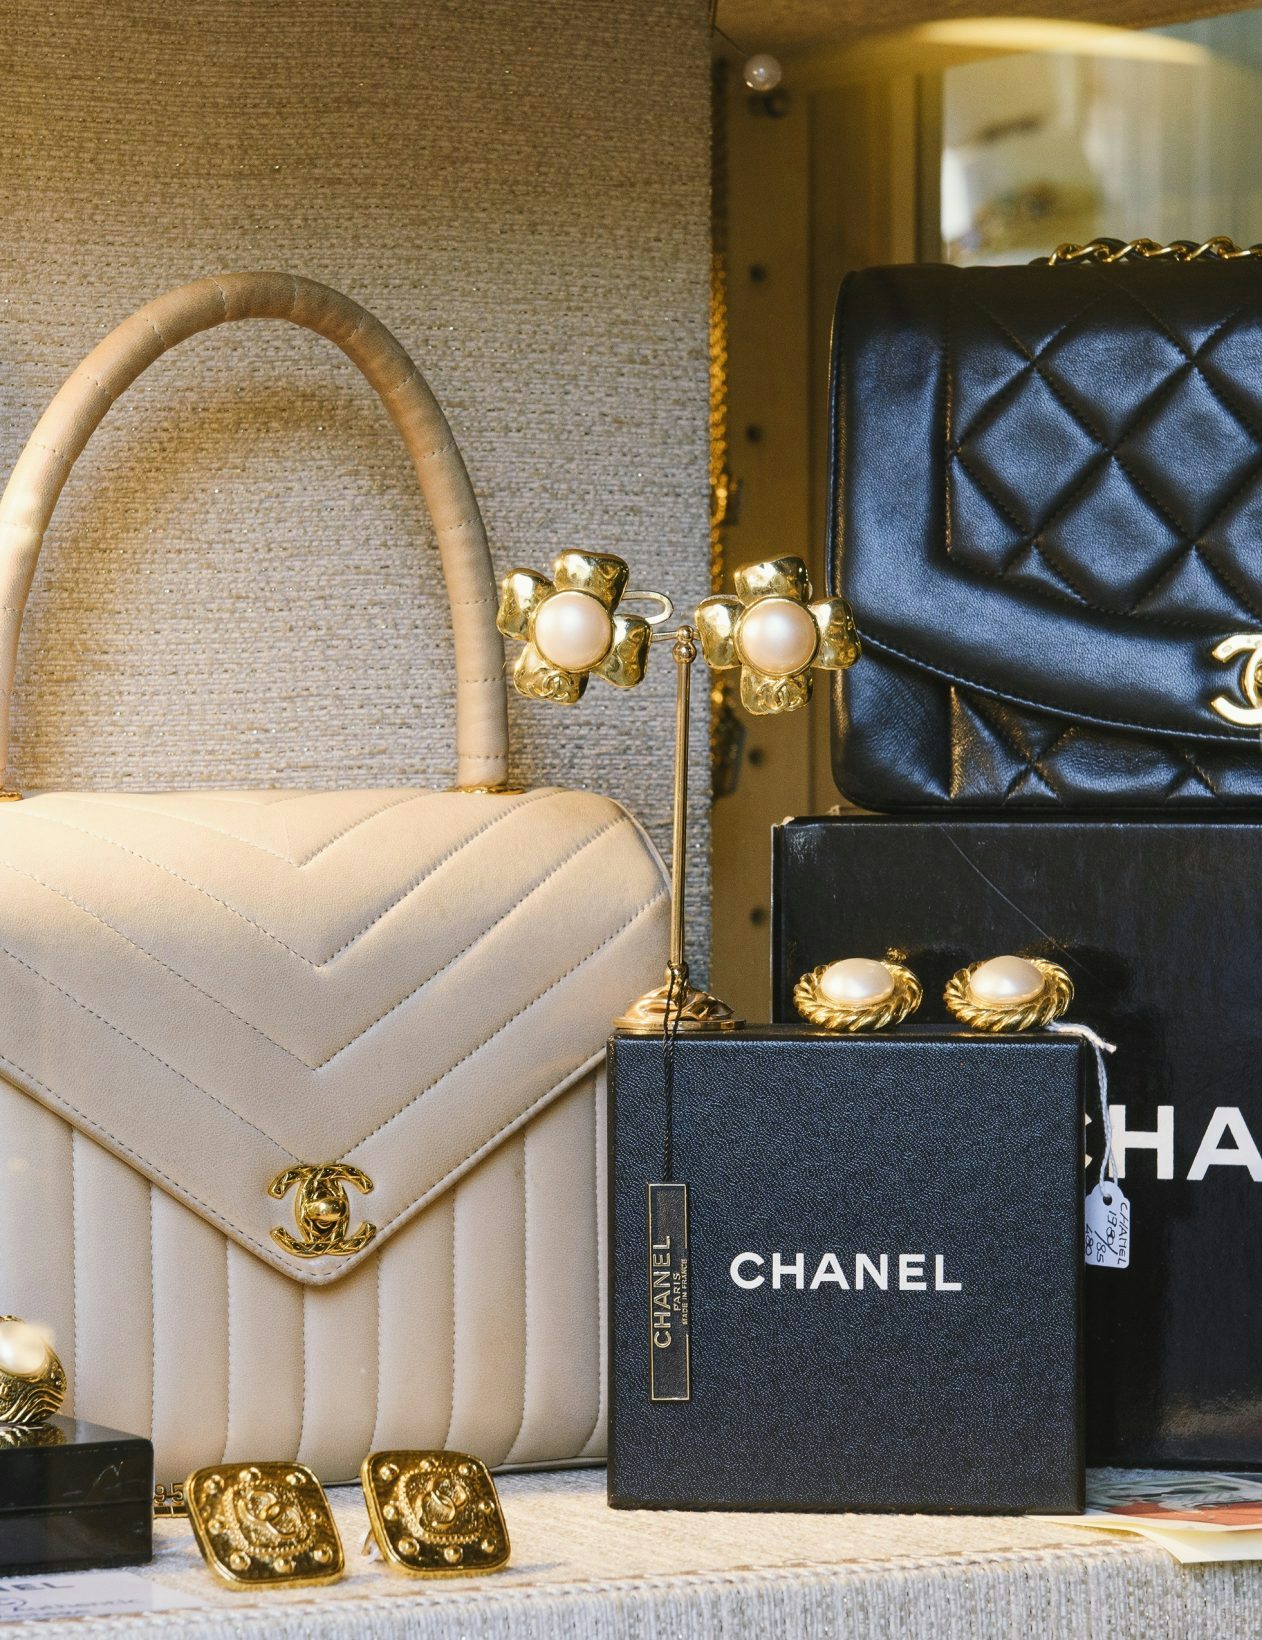 Auctions of Chanel pieces during Paris Fashion Week